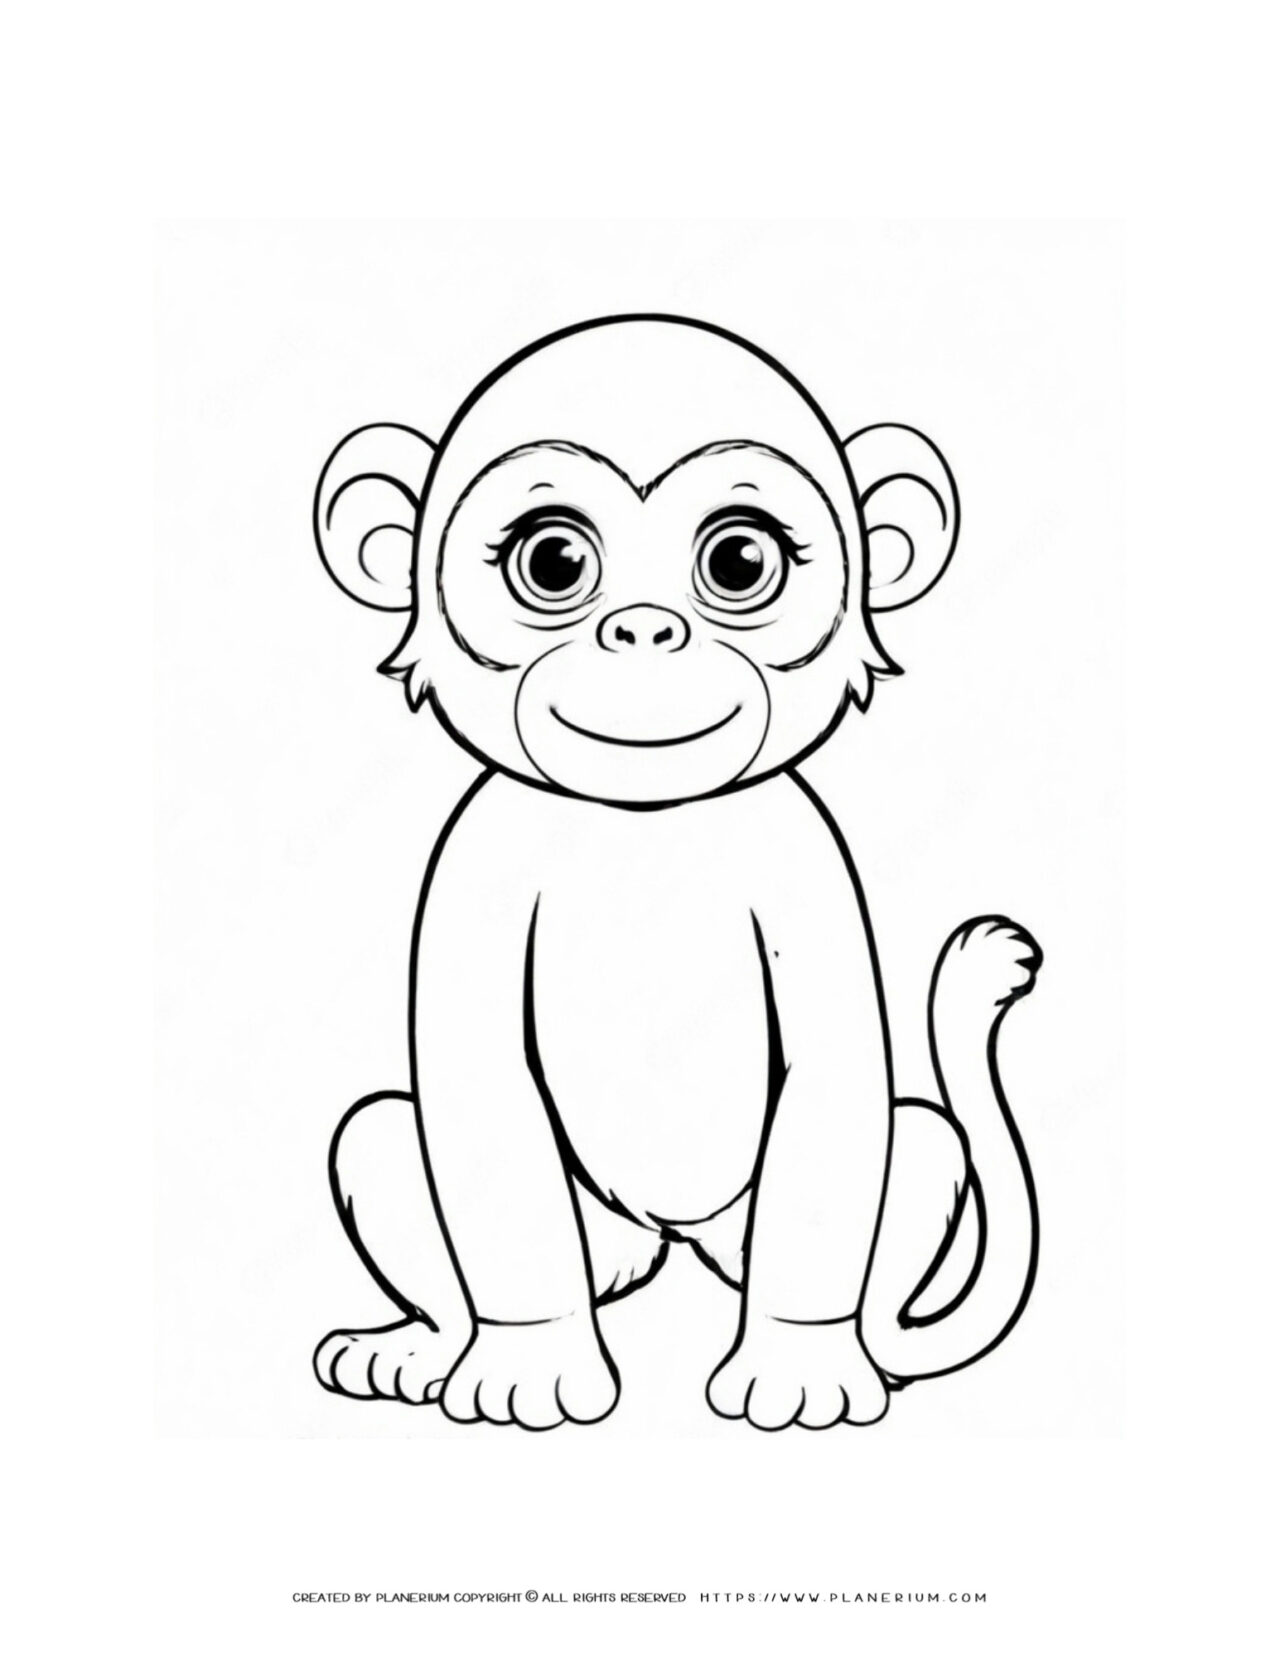 Cute-Baby-Monkey-Outline-Coloring-Page